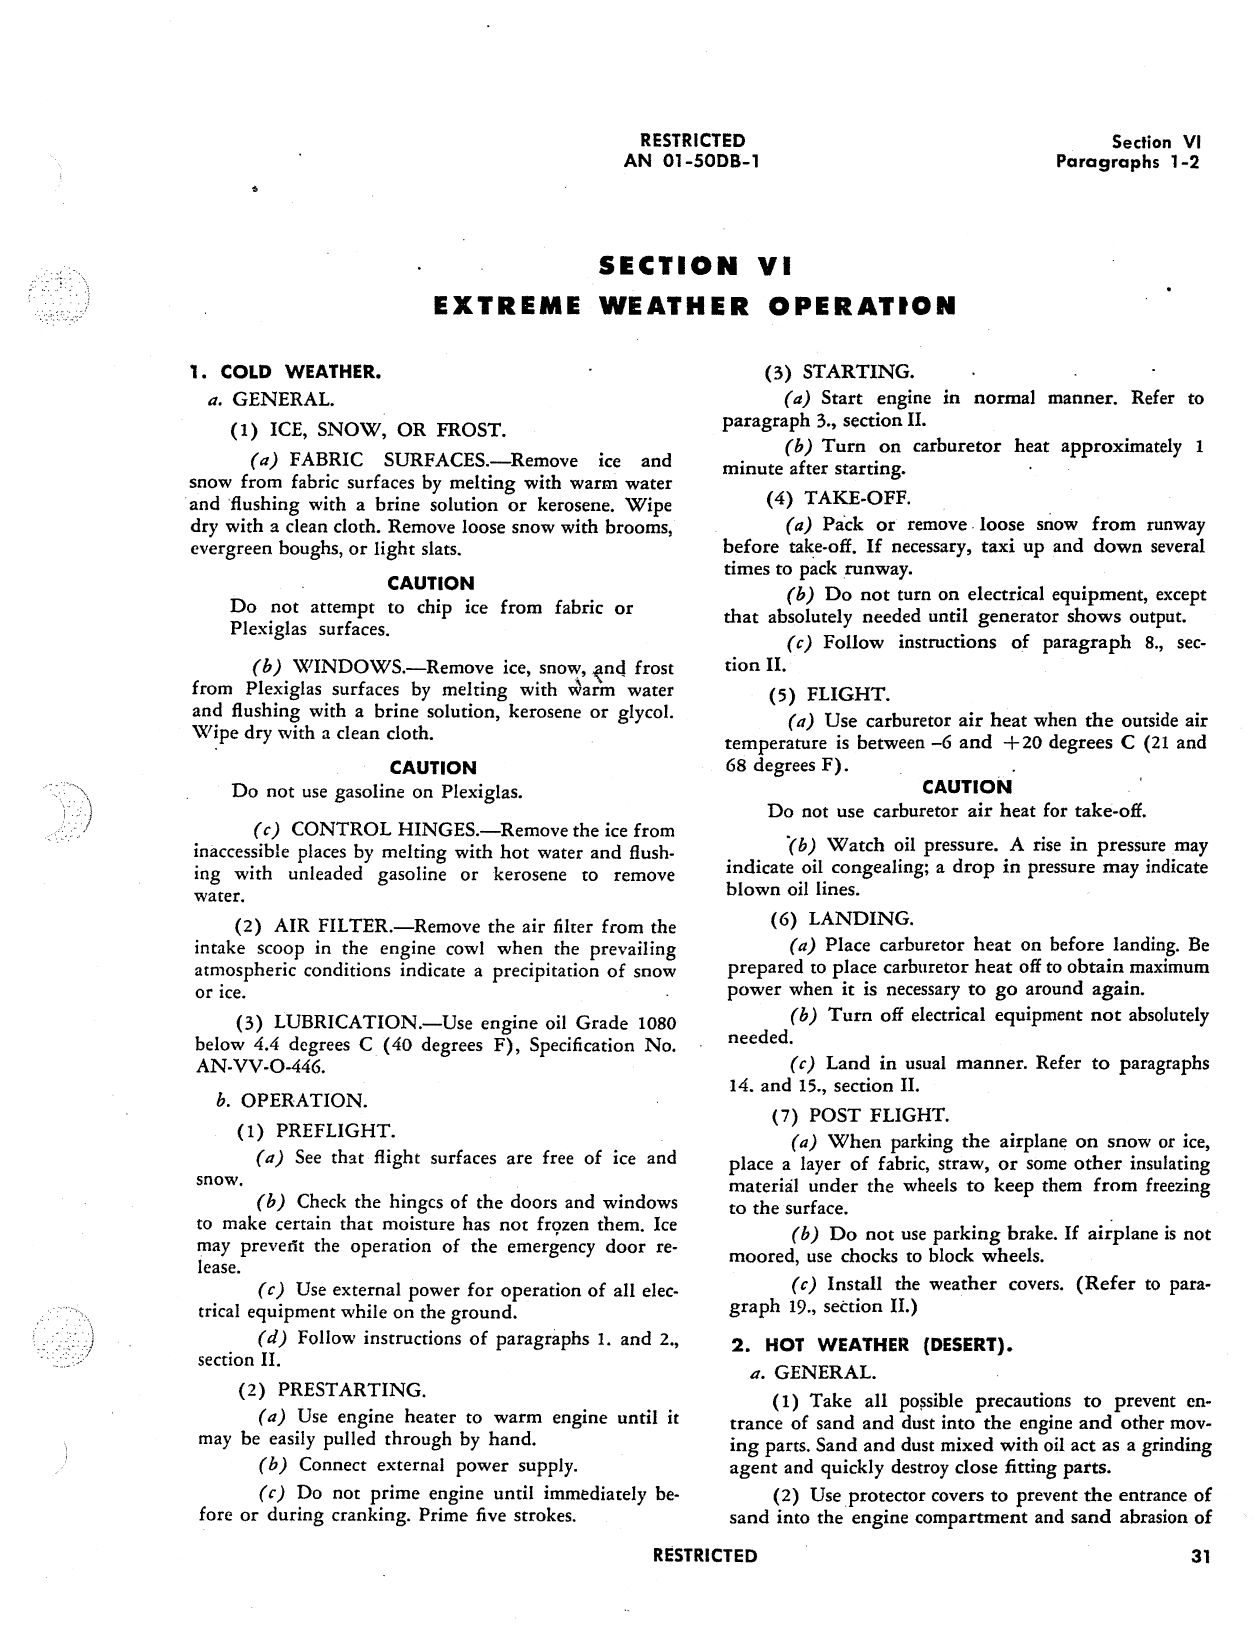 Sample page 34 from AirCorps Library document: Pilot's Flight Operating Instructions - L-5 OY-1